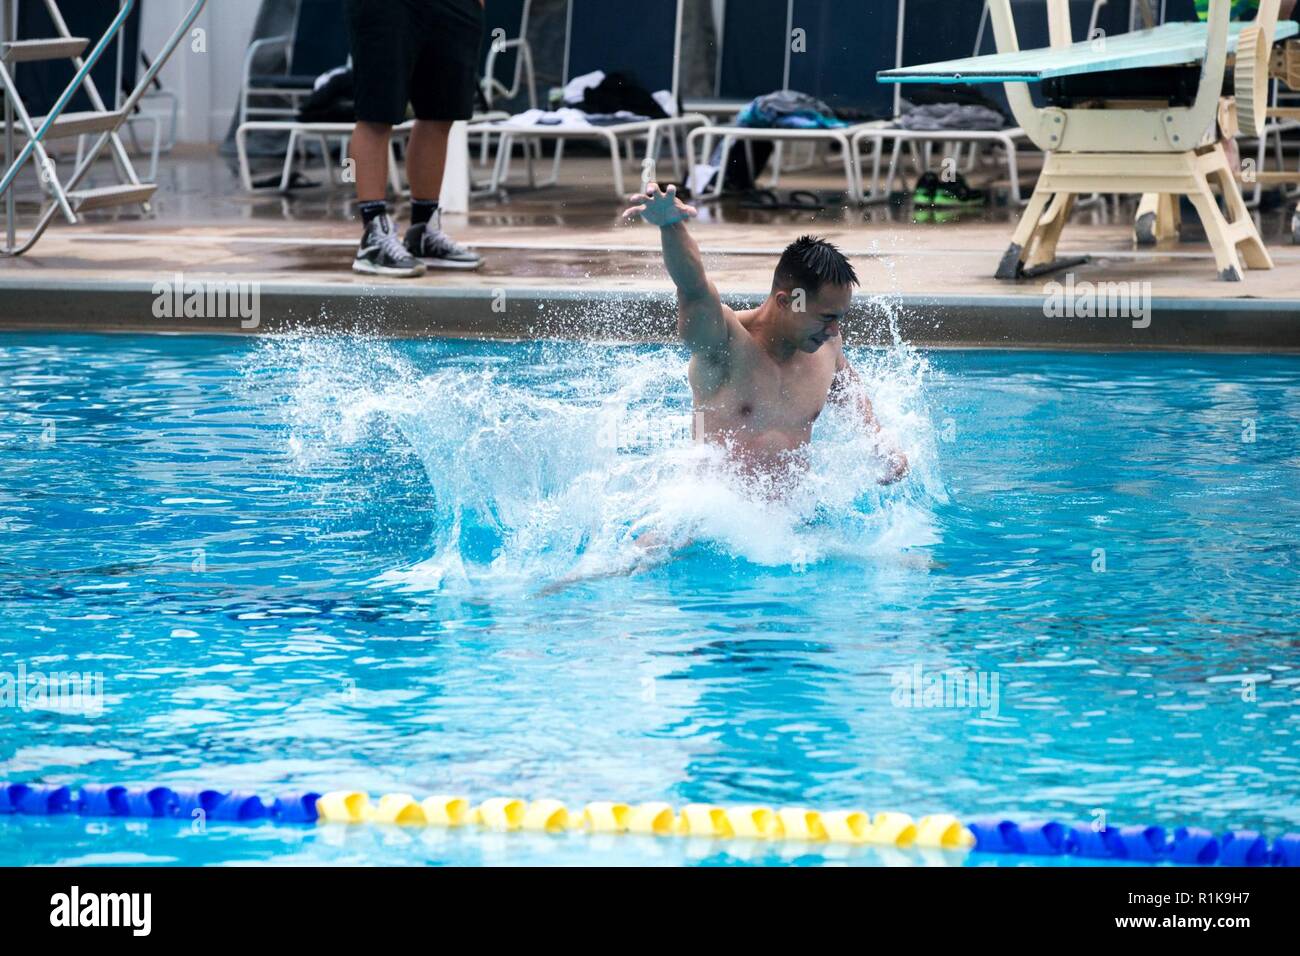 U.S. Marine Corps Cpl. Mathew Bangsoy, engineer equipment electrical systems technician, Marine Corps Tactical Systems Support Activity, Marine Corps Systems Command jumps into the water during the Commanding General’s (CG’s) Cup Dive Competition at the 13 Area Pool, Marine Corps Base Camp Pendleton, California, Oct. 11, 2018. The CG’s Cup is an intramural sports program that was developed to give service members from various units across MCB Camp Pendleton an opportunity to compete in organized sporting events in order to promote fitness, teamwork and esprit de corps. The CG’s cup also allows Stock Photo